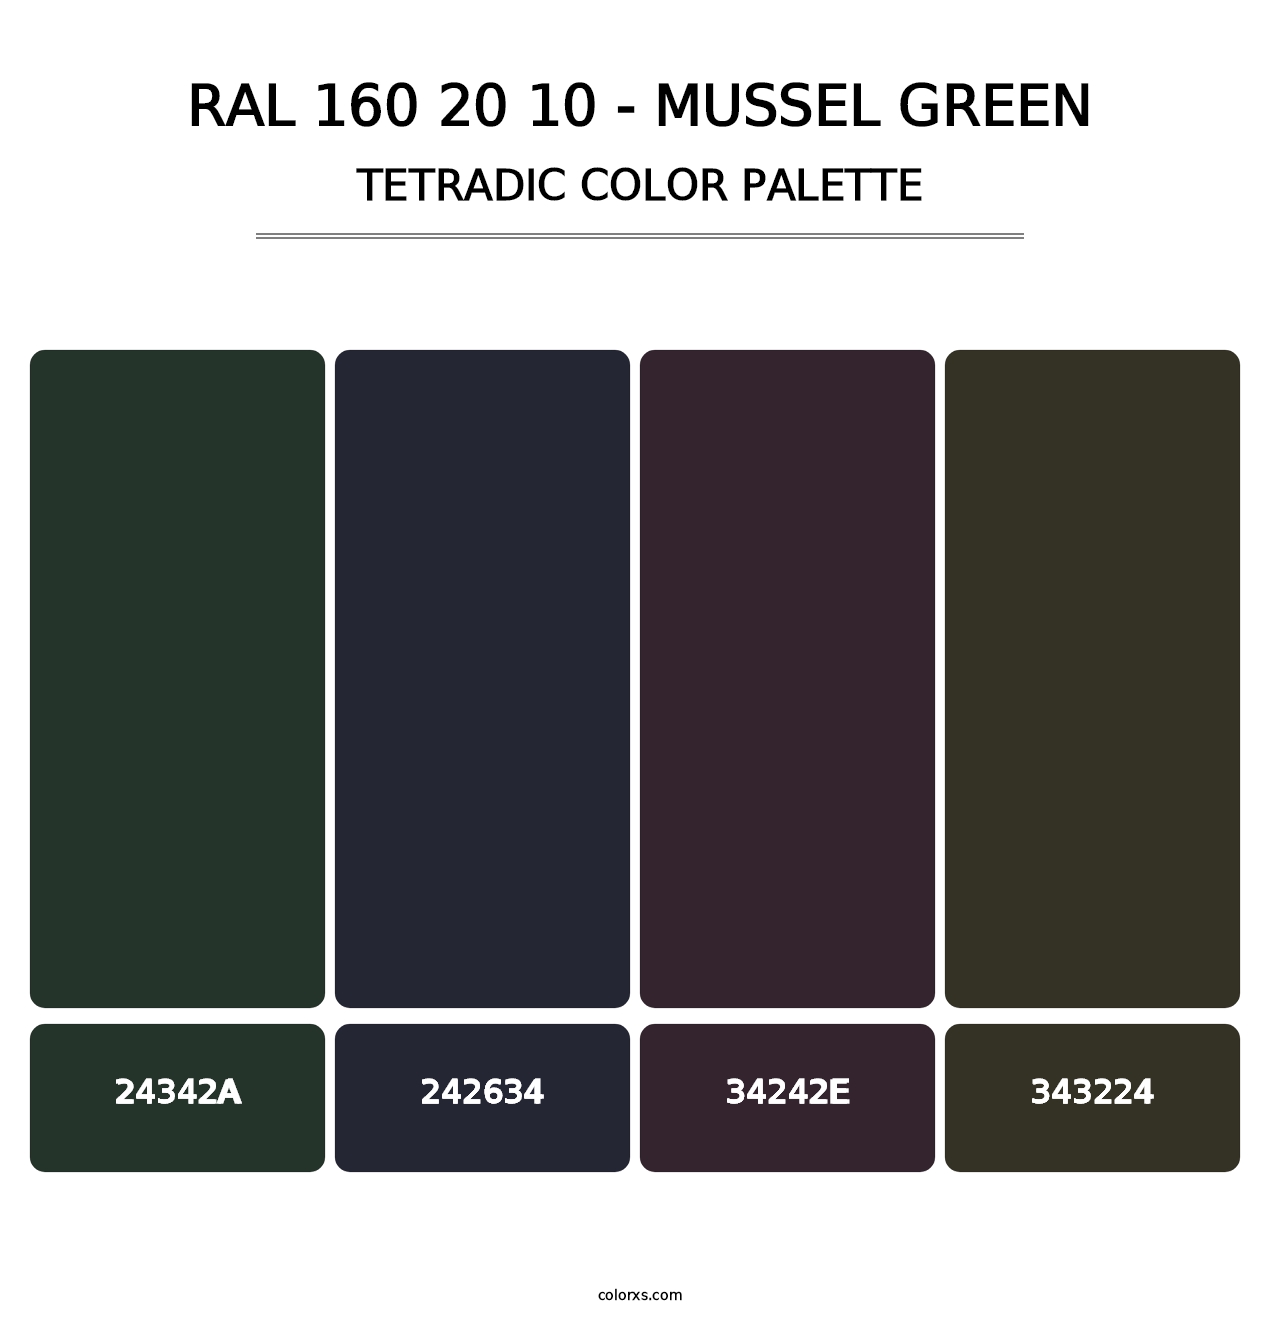 RAL 160 20 10 - Mussel Green - Tetradic Color Palette